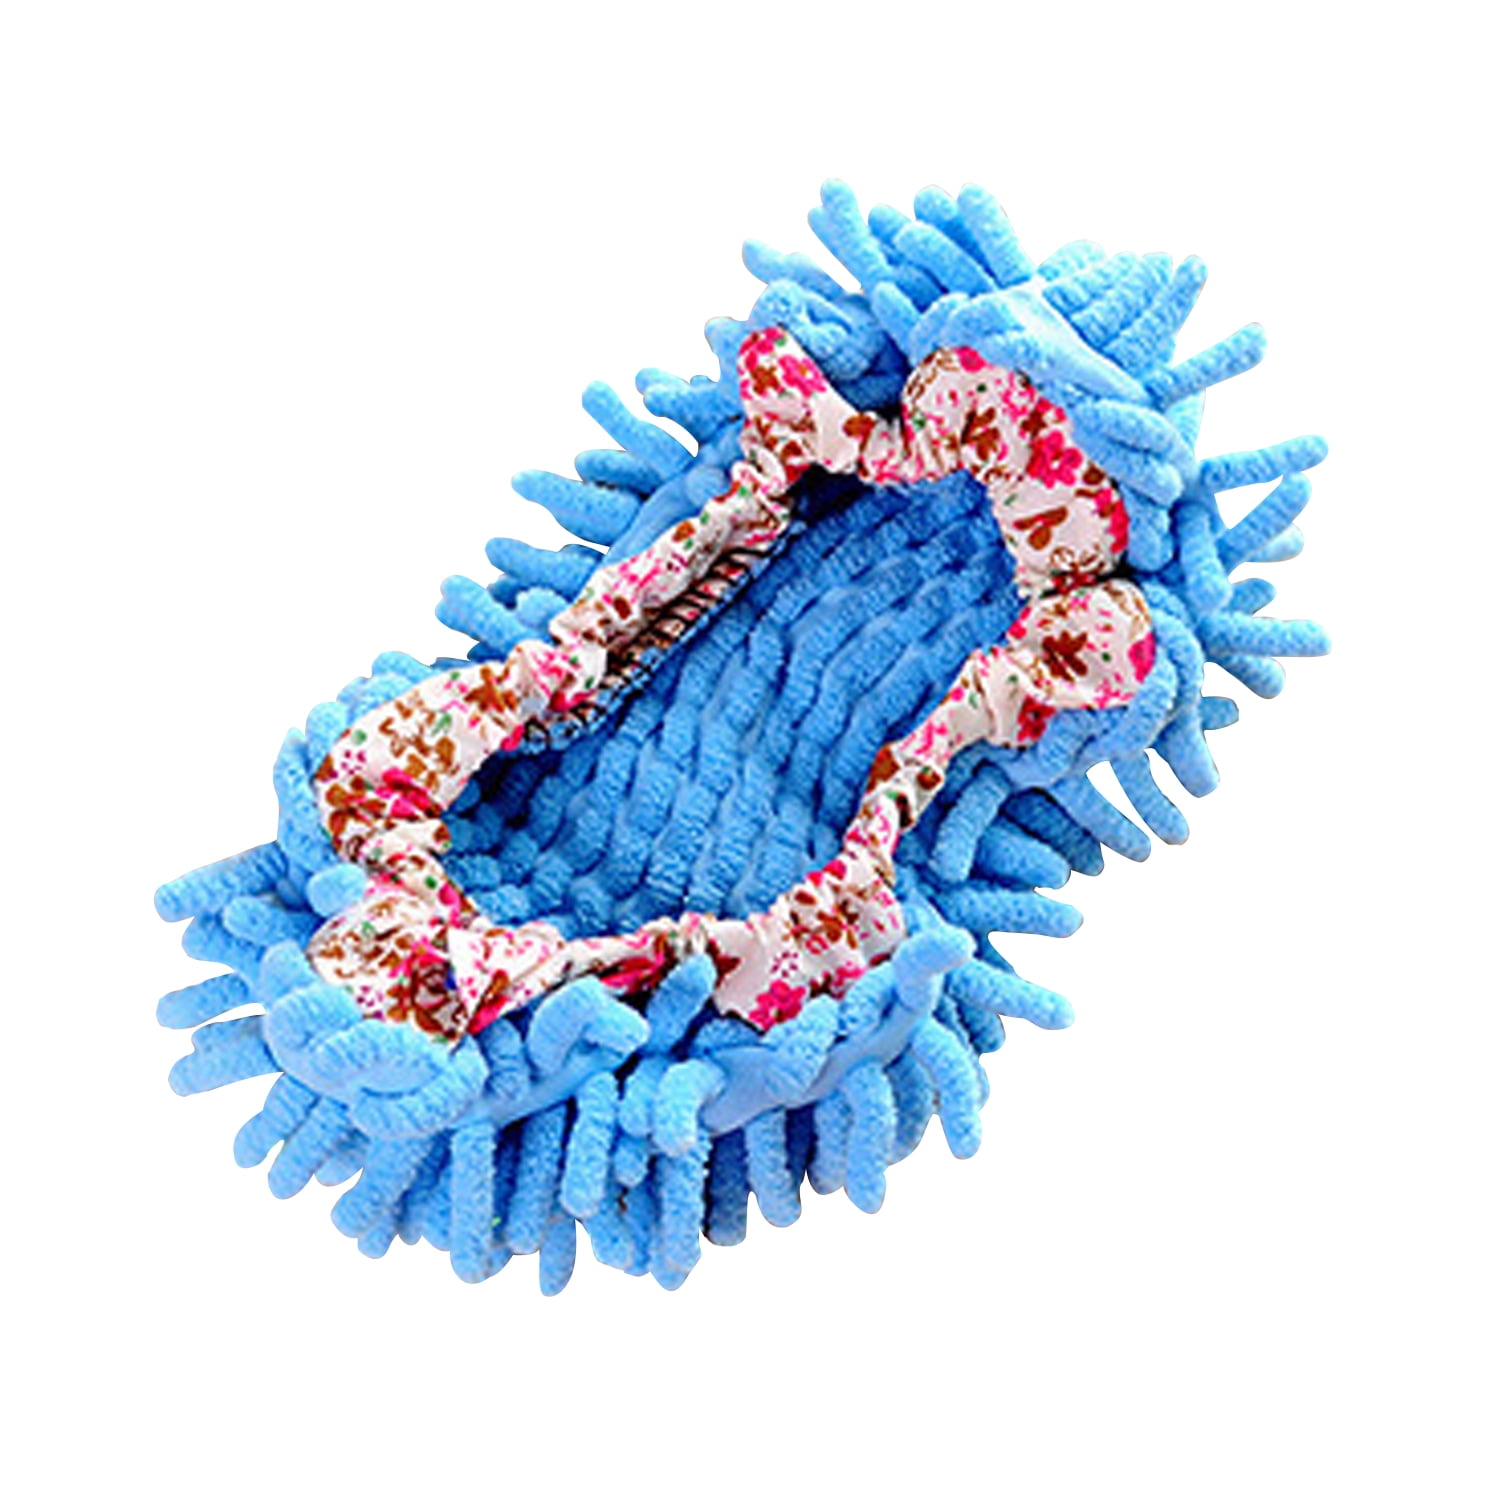 Moppy Slippers Chenille Shoes Cover Multi-Functional Dust Duster Mop I3P4 